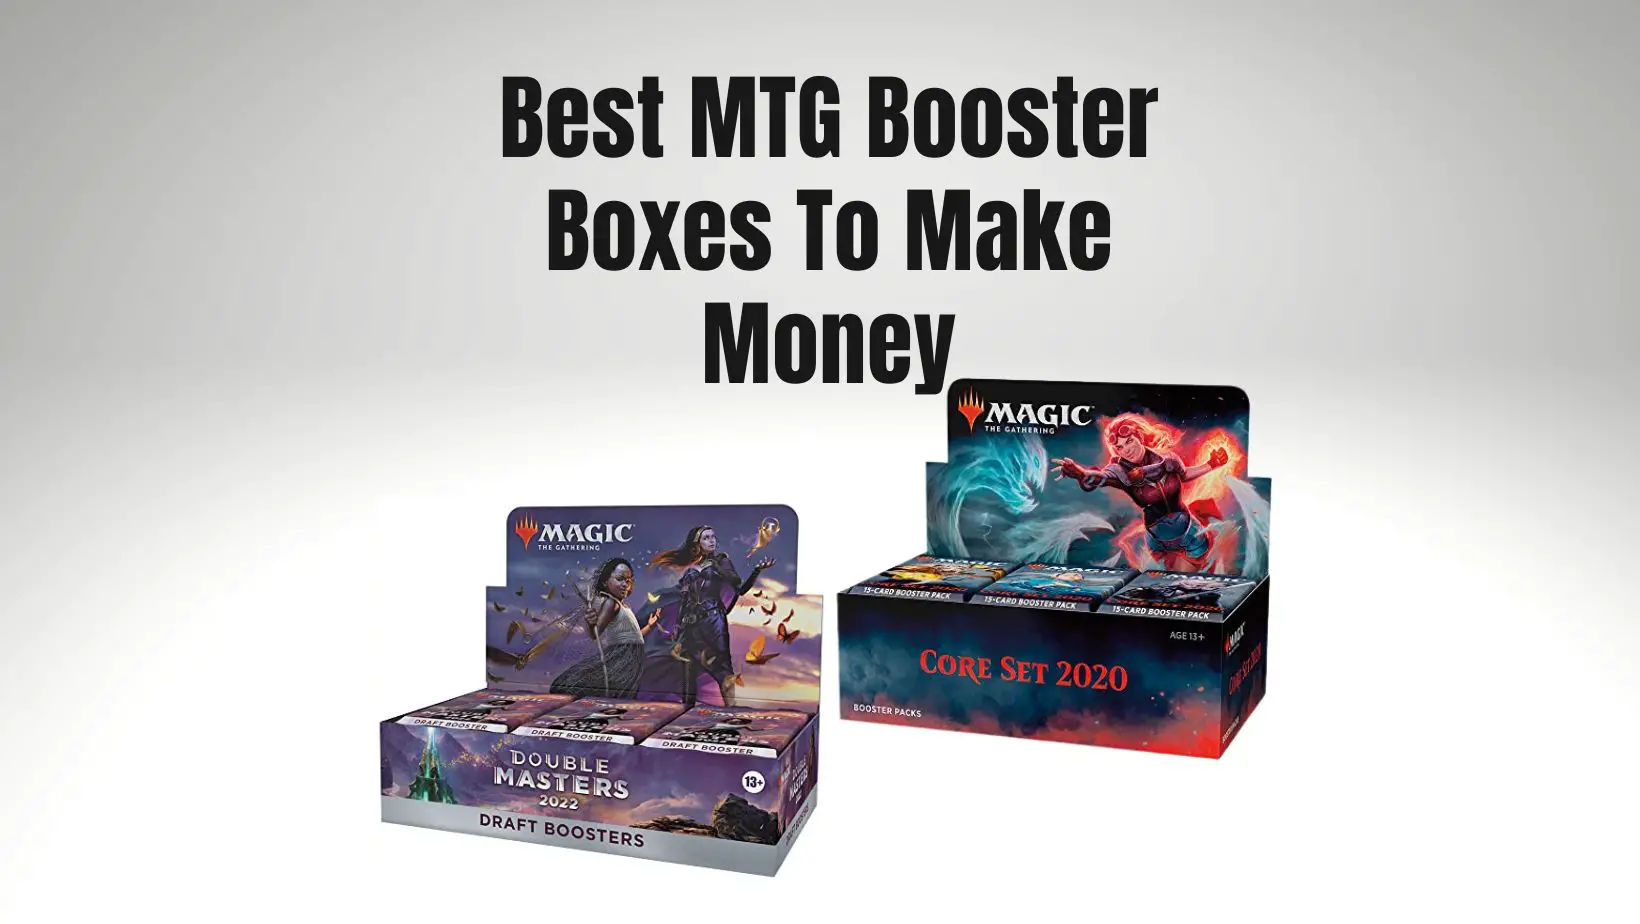 MTG Booster Box Is the Best to Buy